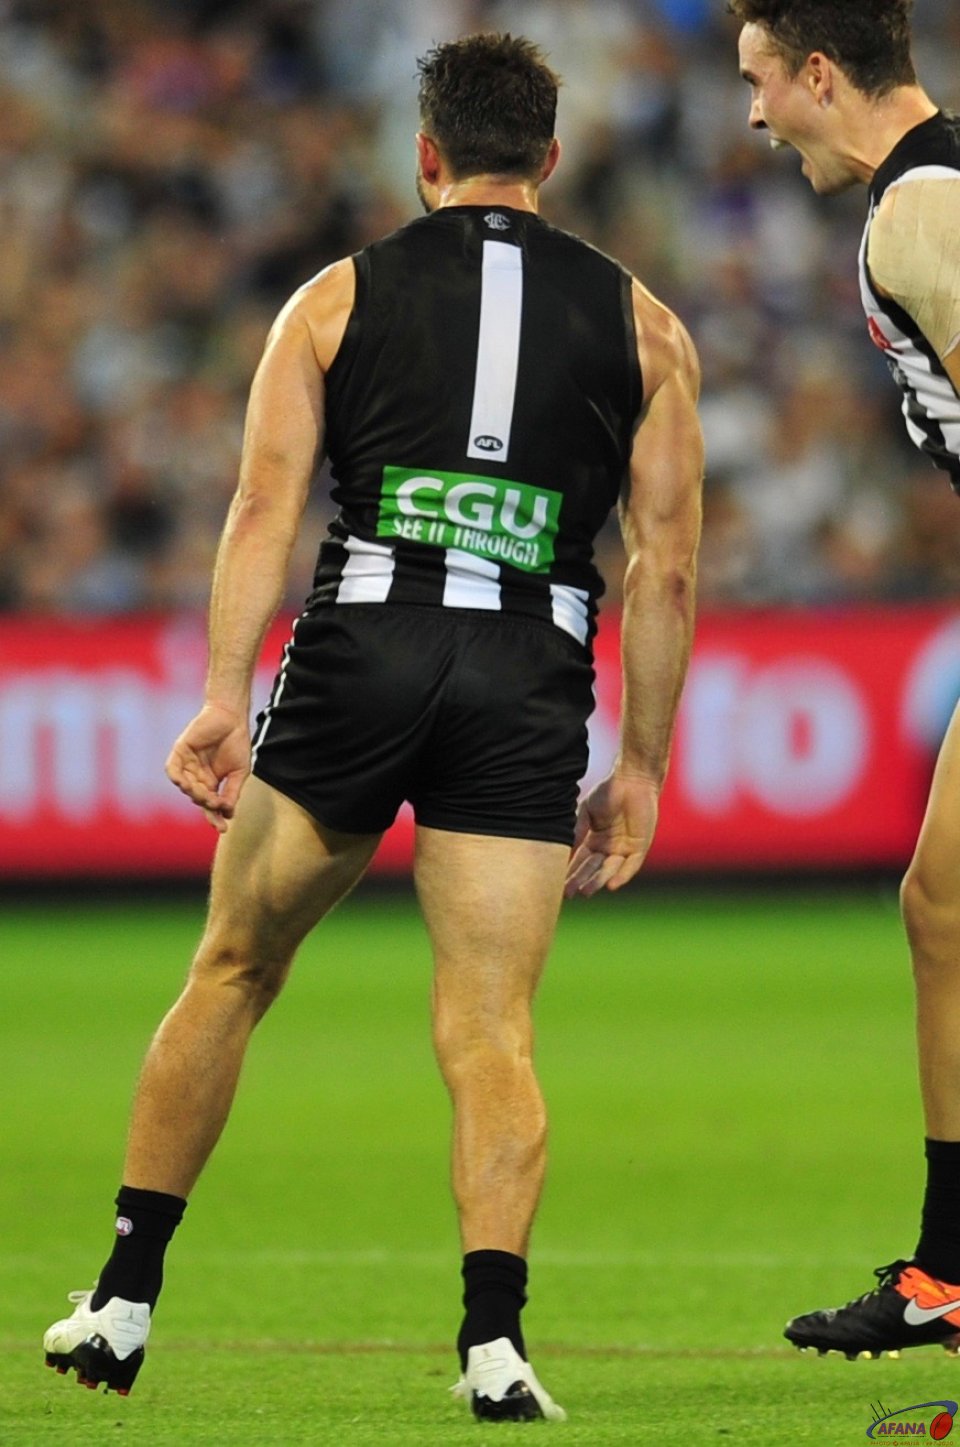 Fasolo celebrates another clutch goal